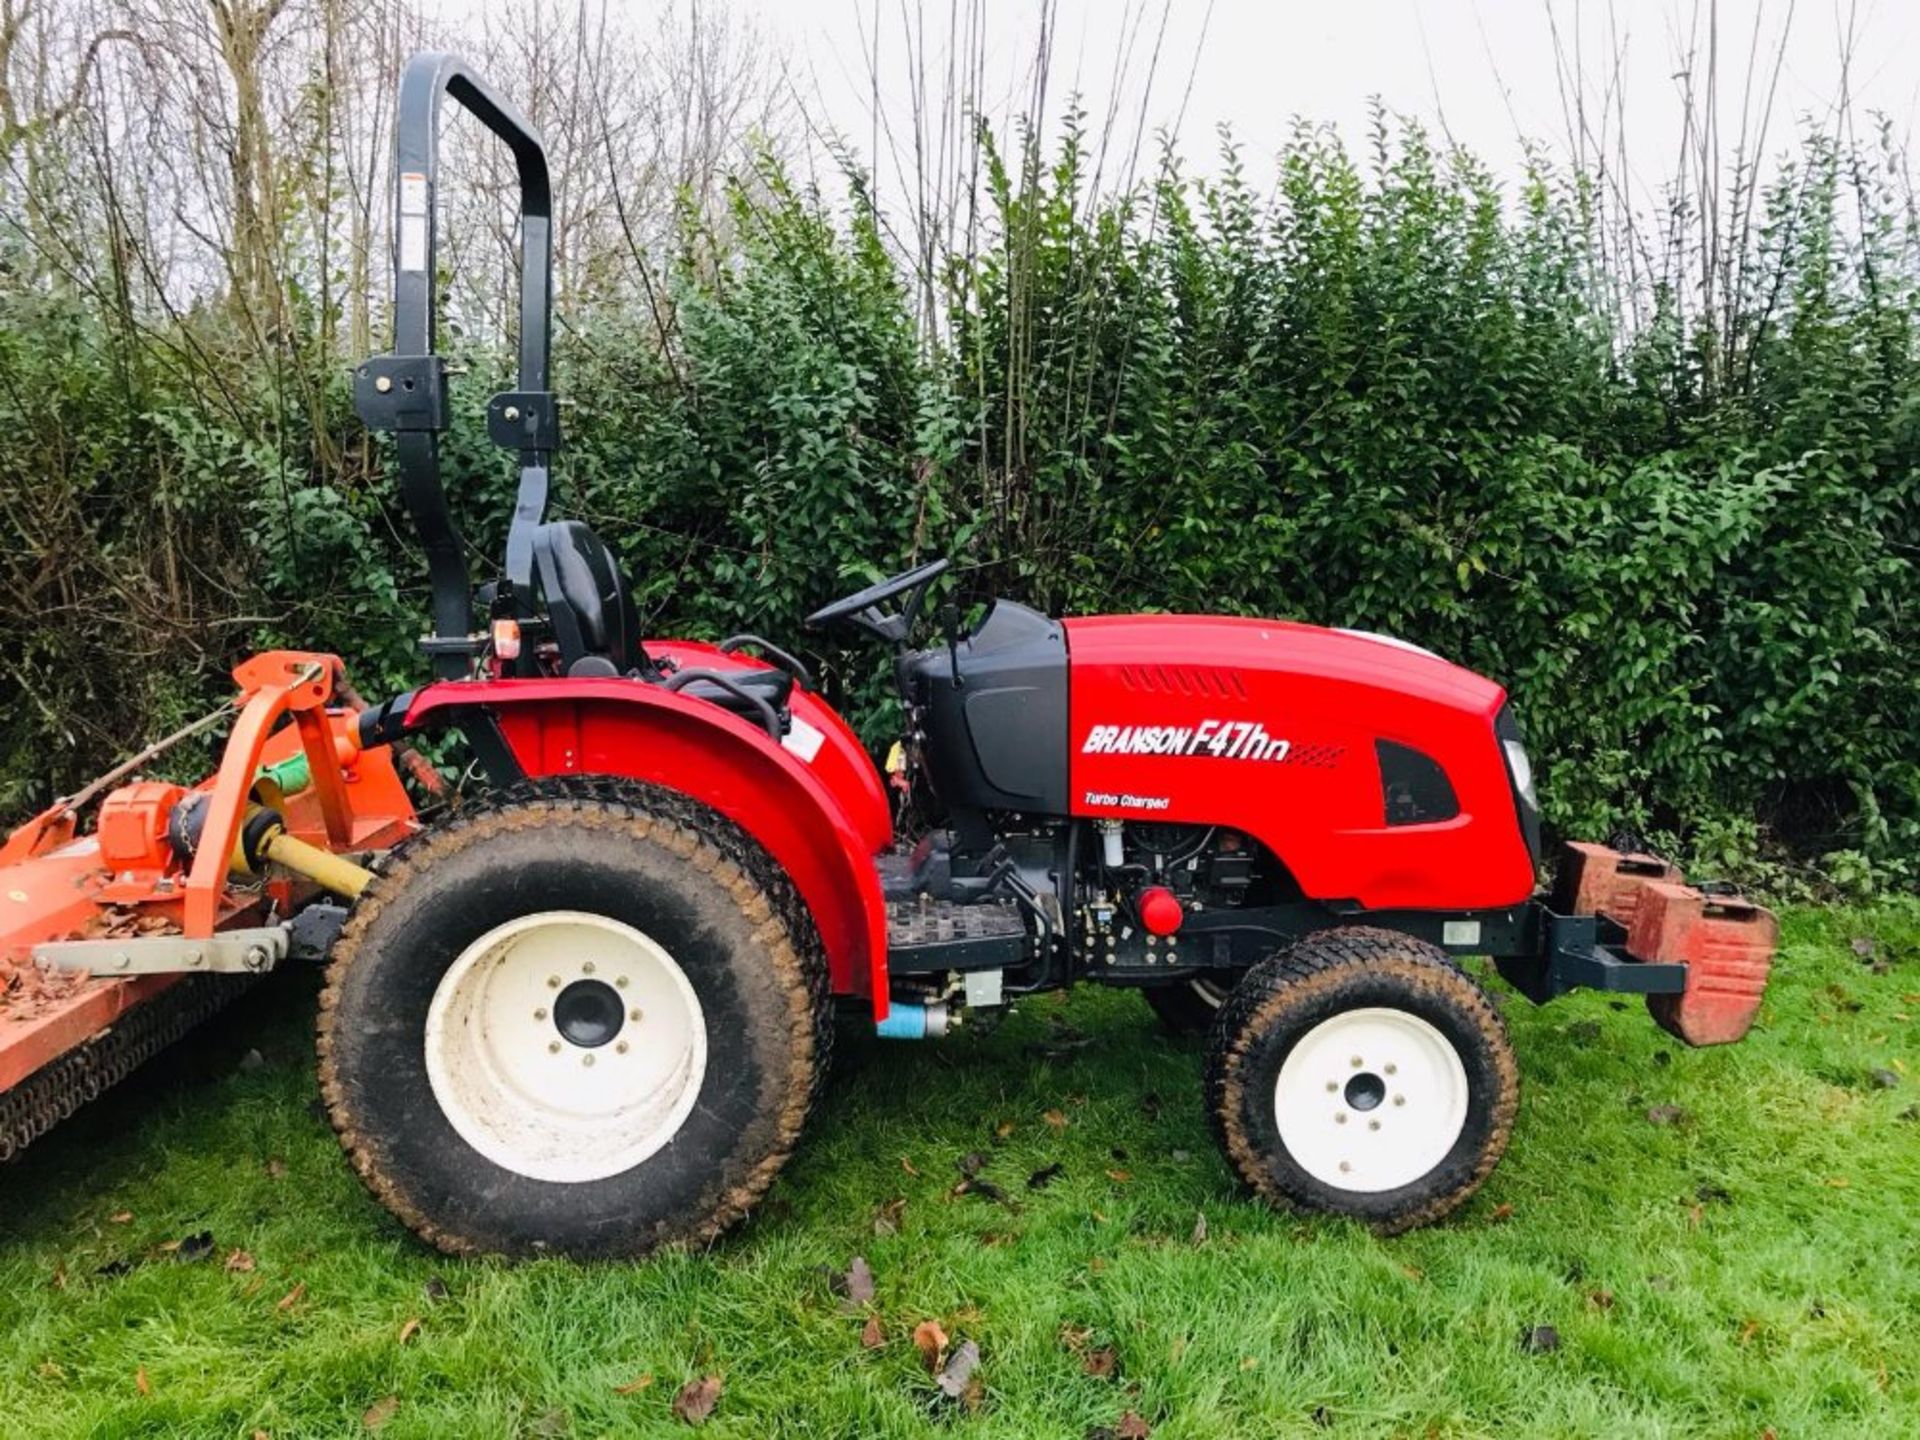 BRANSON F47HN COMPACT TRACTOR ON TURF TYRES, HYDROSTATIC DRIVE, 47HP, ROAD REGISTERED 67 REG WITH